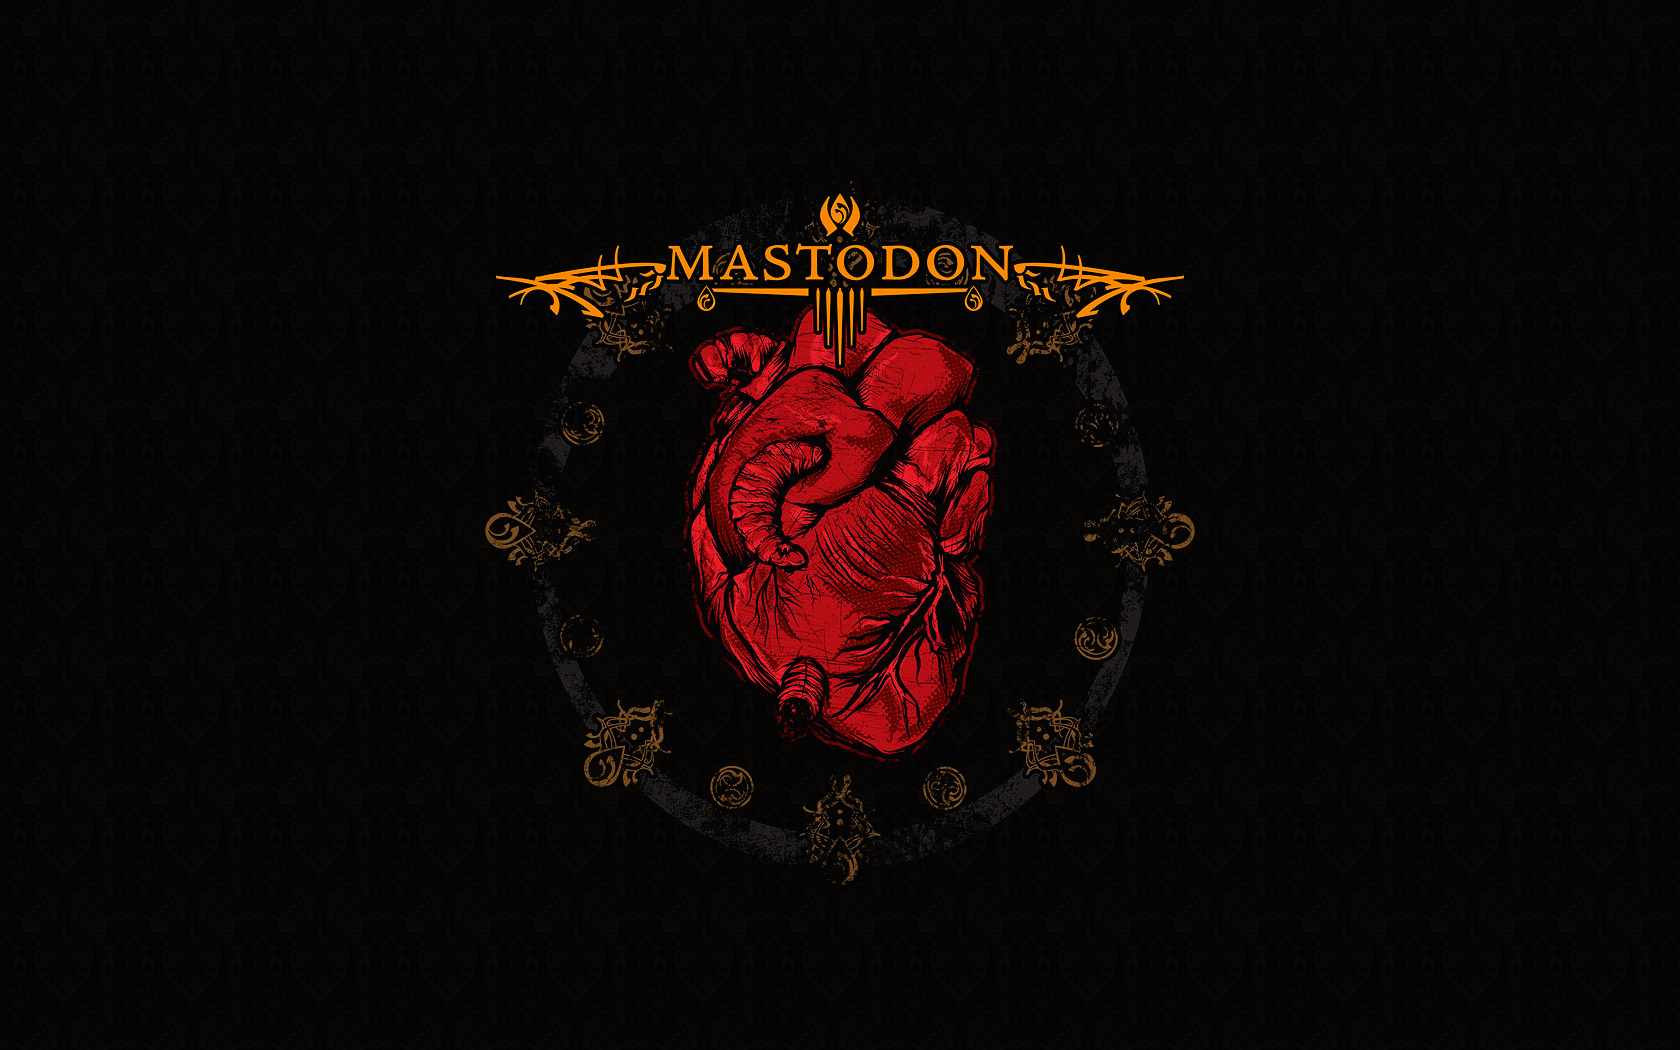 Heart Of Mastodon Original Image I Believe Is From Ang By